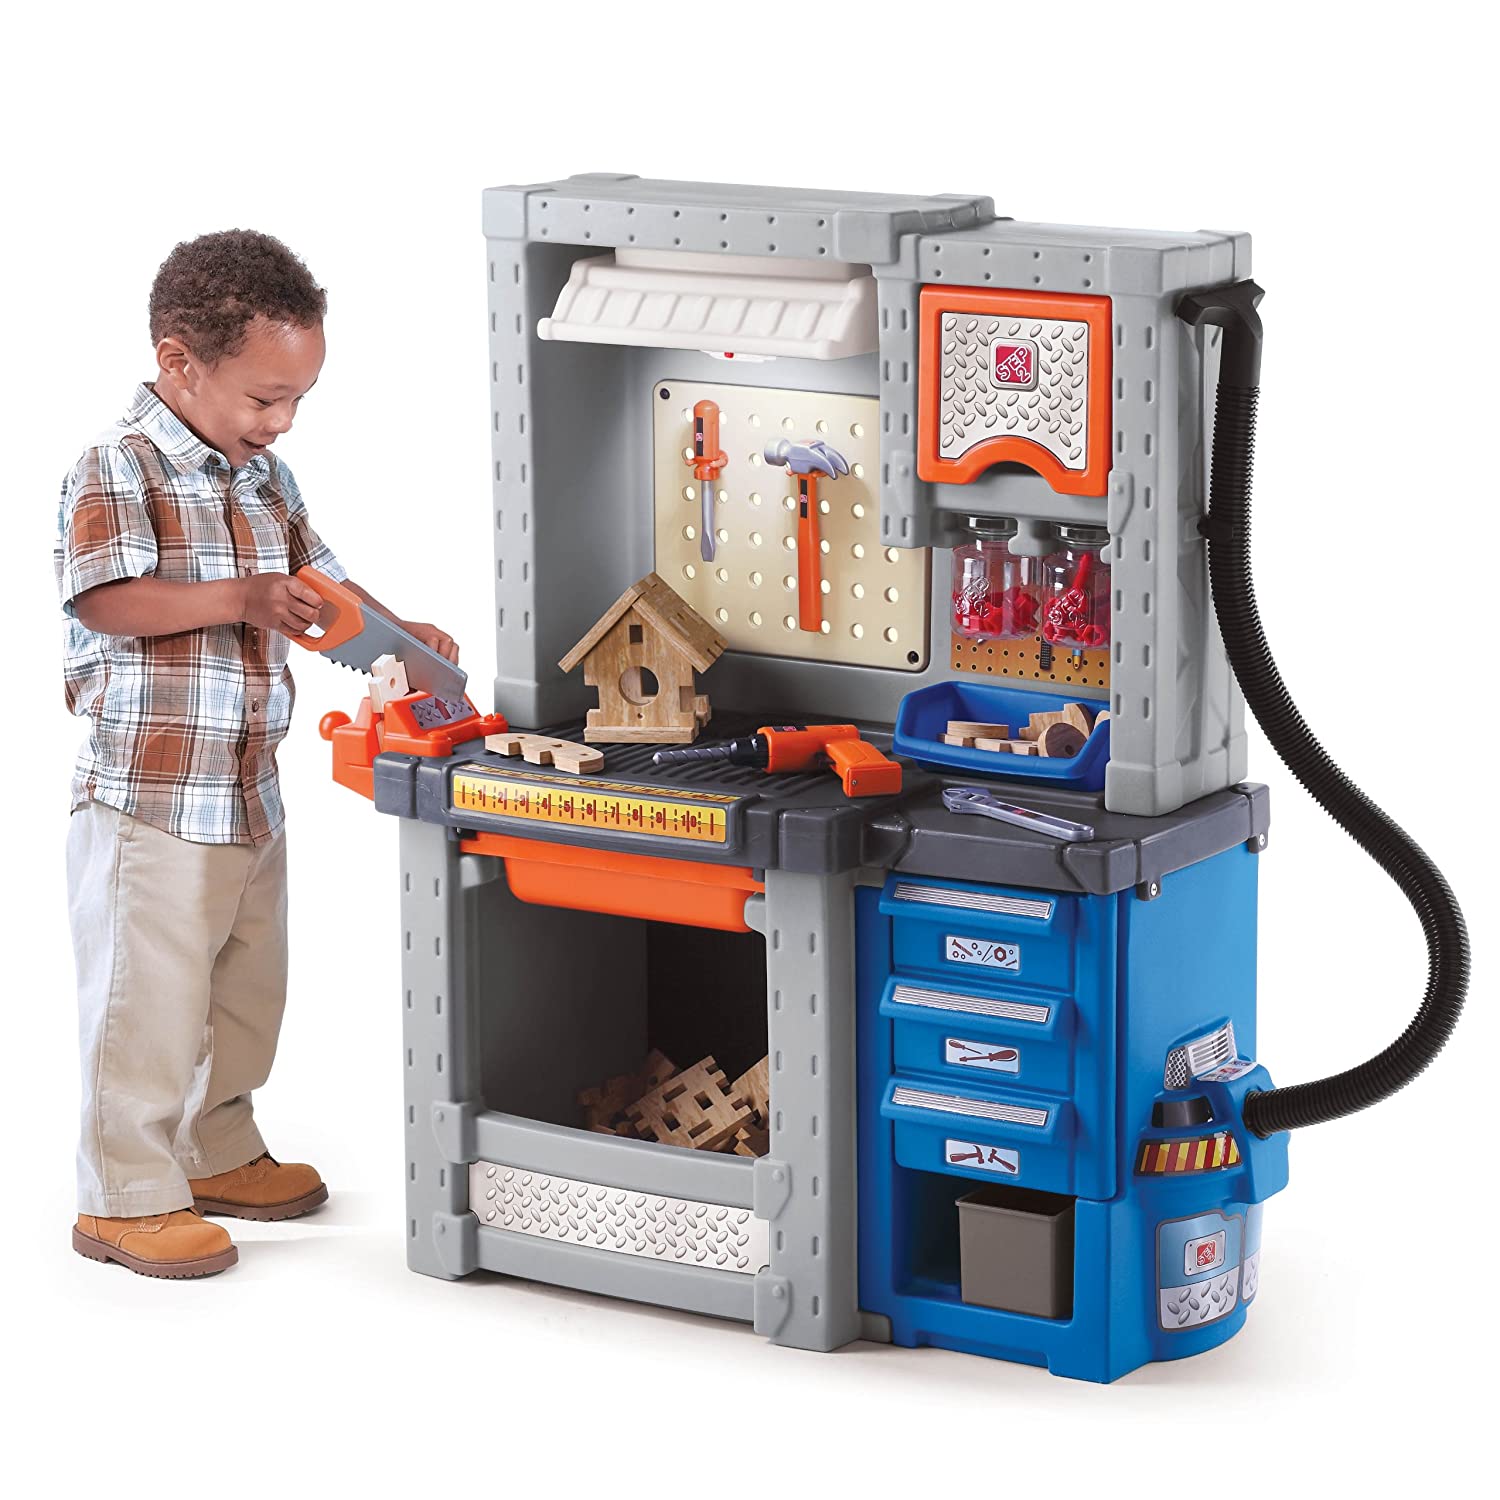 Top 9 Best Kids Toy Tool Bench Reviews in 2022 2